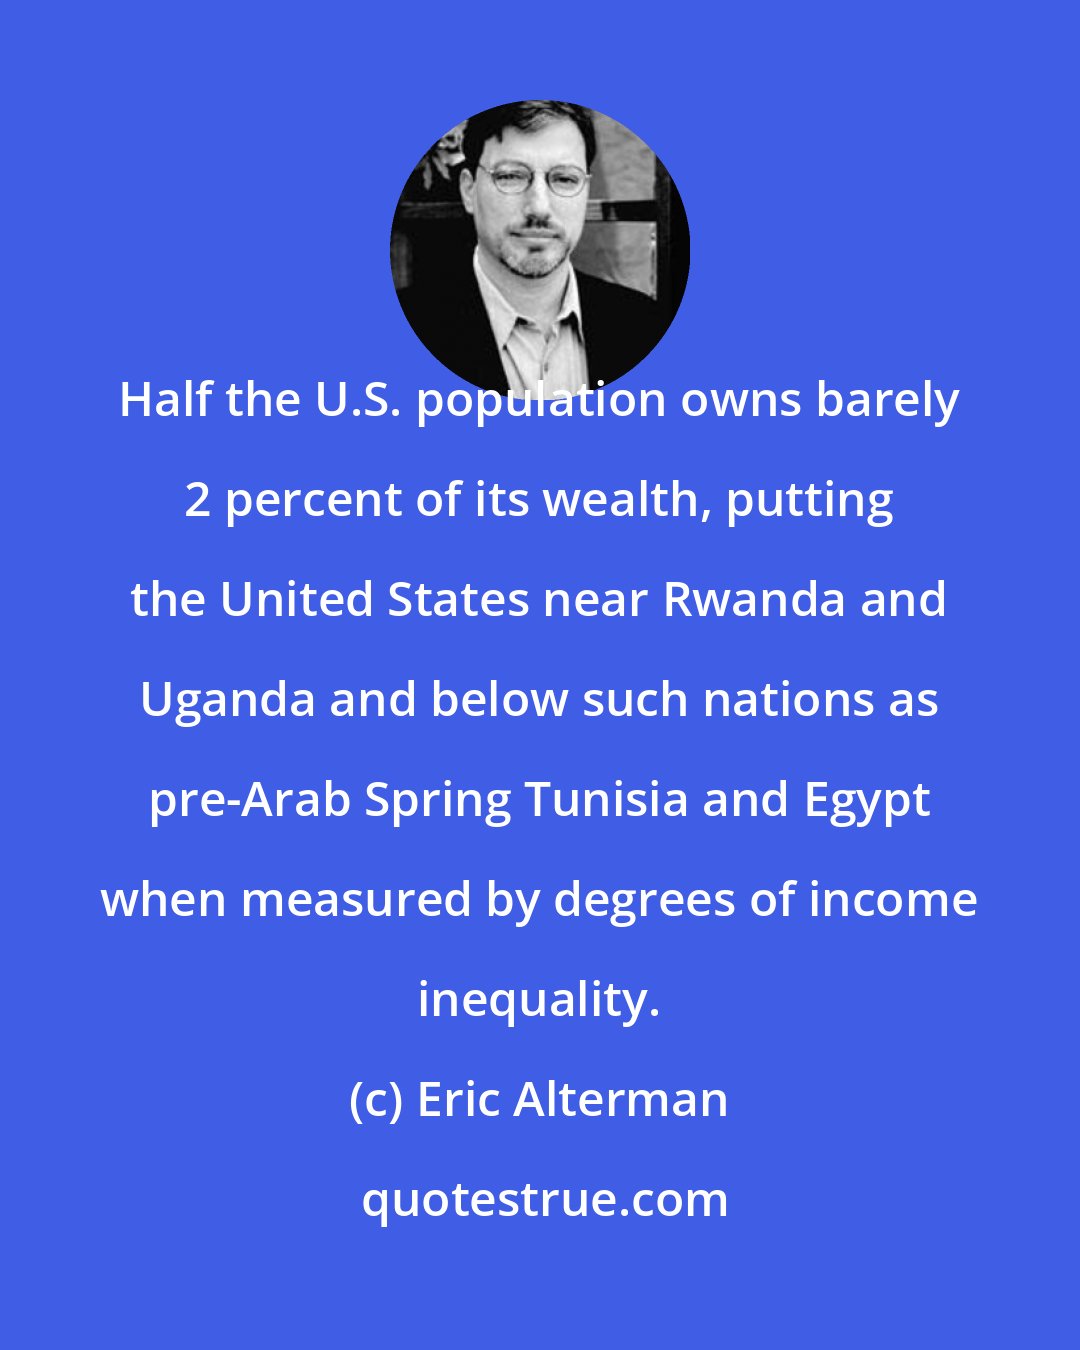 Eric Alterman: Half the U.S. population owns barely 2 percent of its wealth, putting the United States near Rwanda and Uganda and below such nations as pre-Arab Spring Tunisia and Egypt when measured by degrees of income inequality.